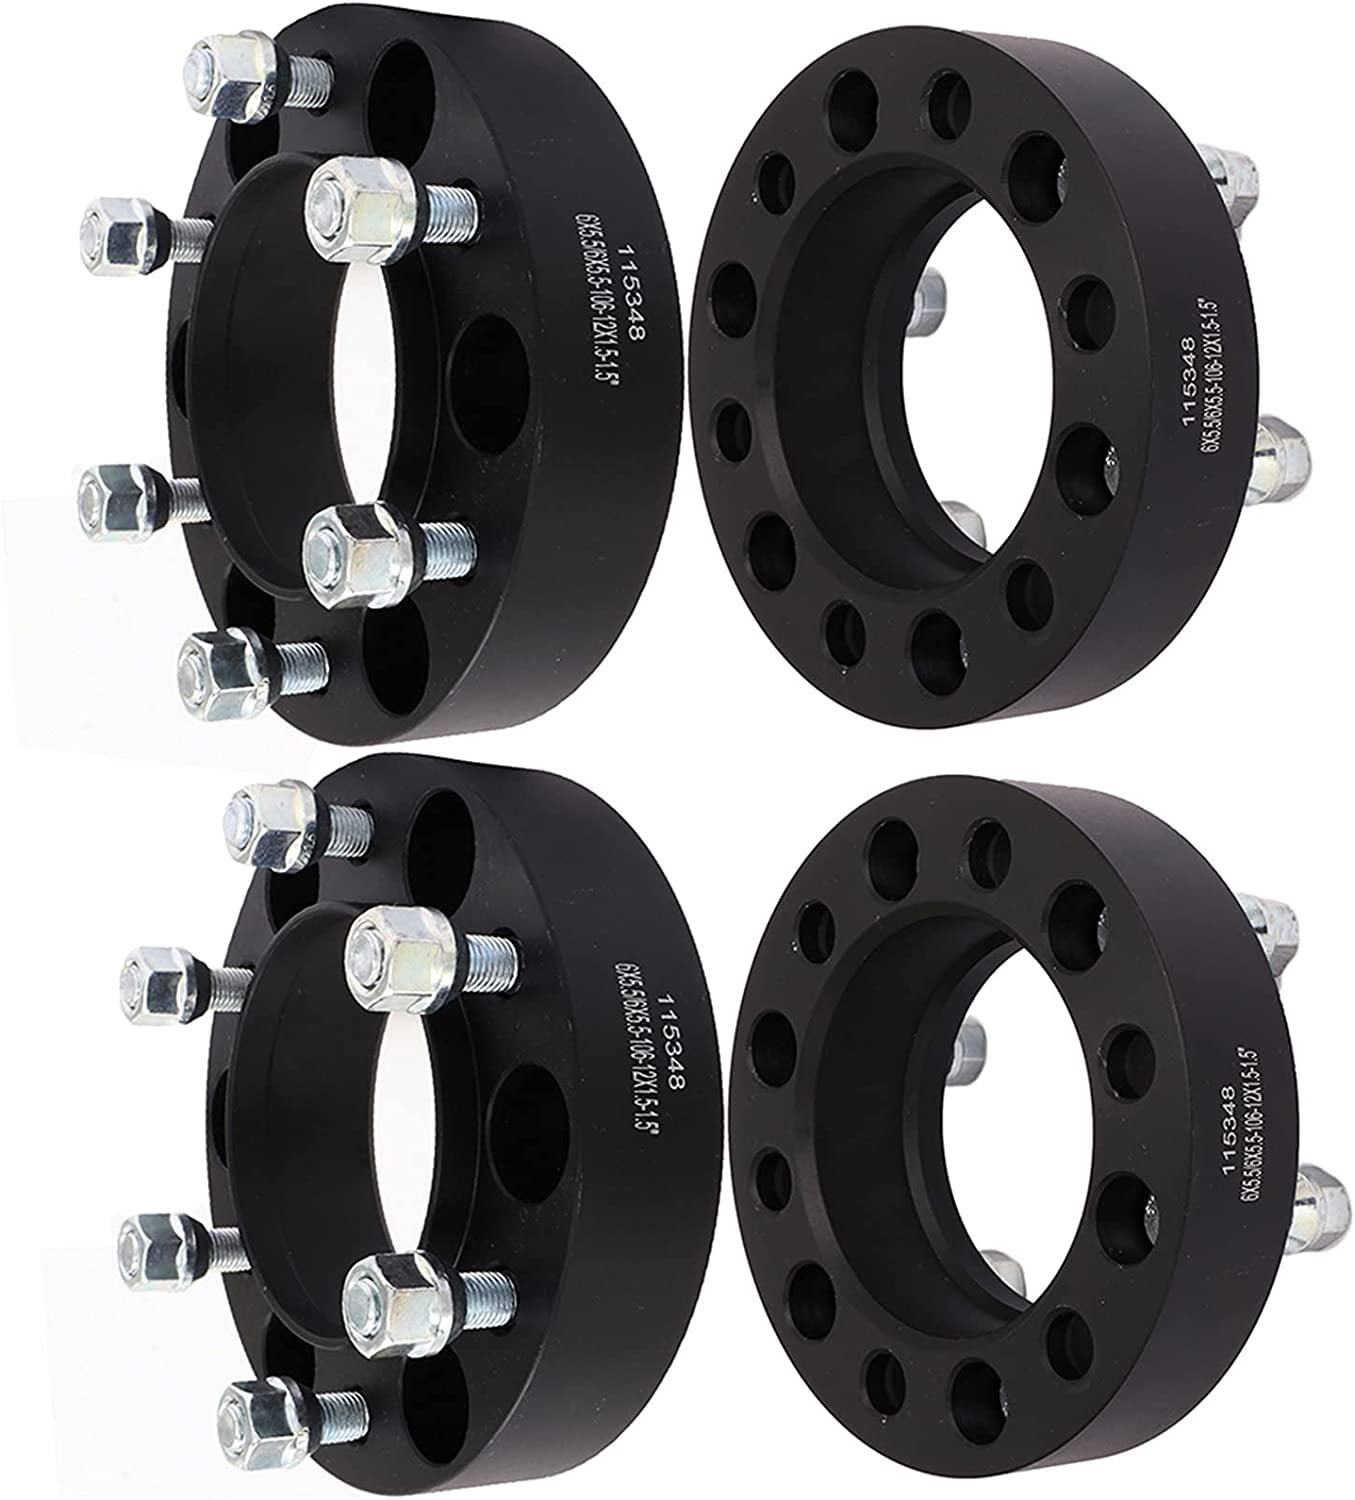 Thread-Locking Adhensives. 6x5.5 Wheel Spacers Compatible with Tacoma Tundra 4 Runner 2 inch 6x139.7 Hubcentric Wheel Spacers 106 Hub Bore with 12x1.5 ET Lug Nuts 